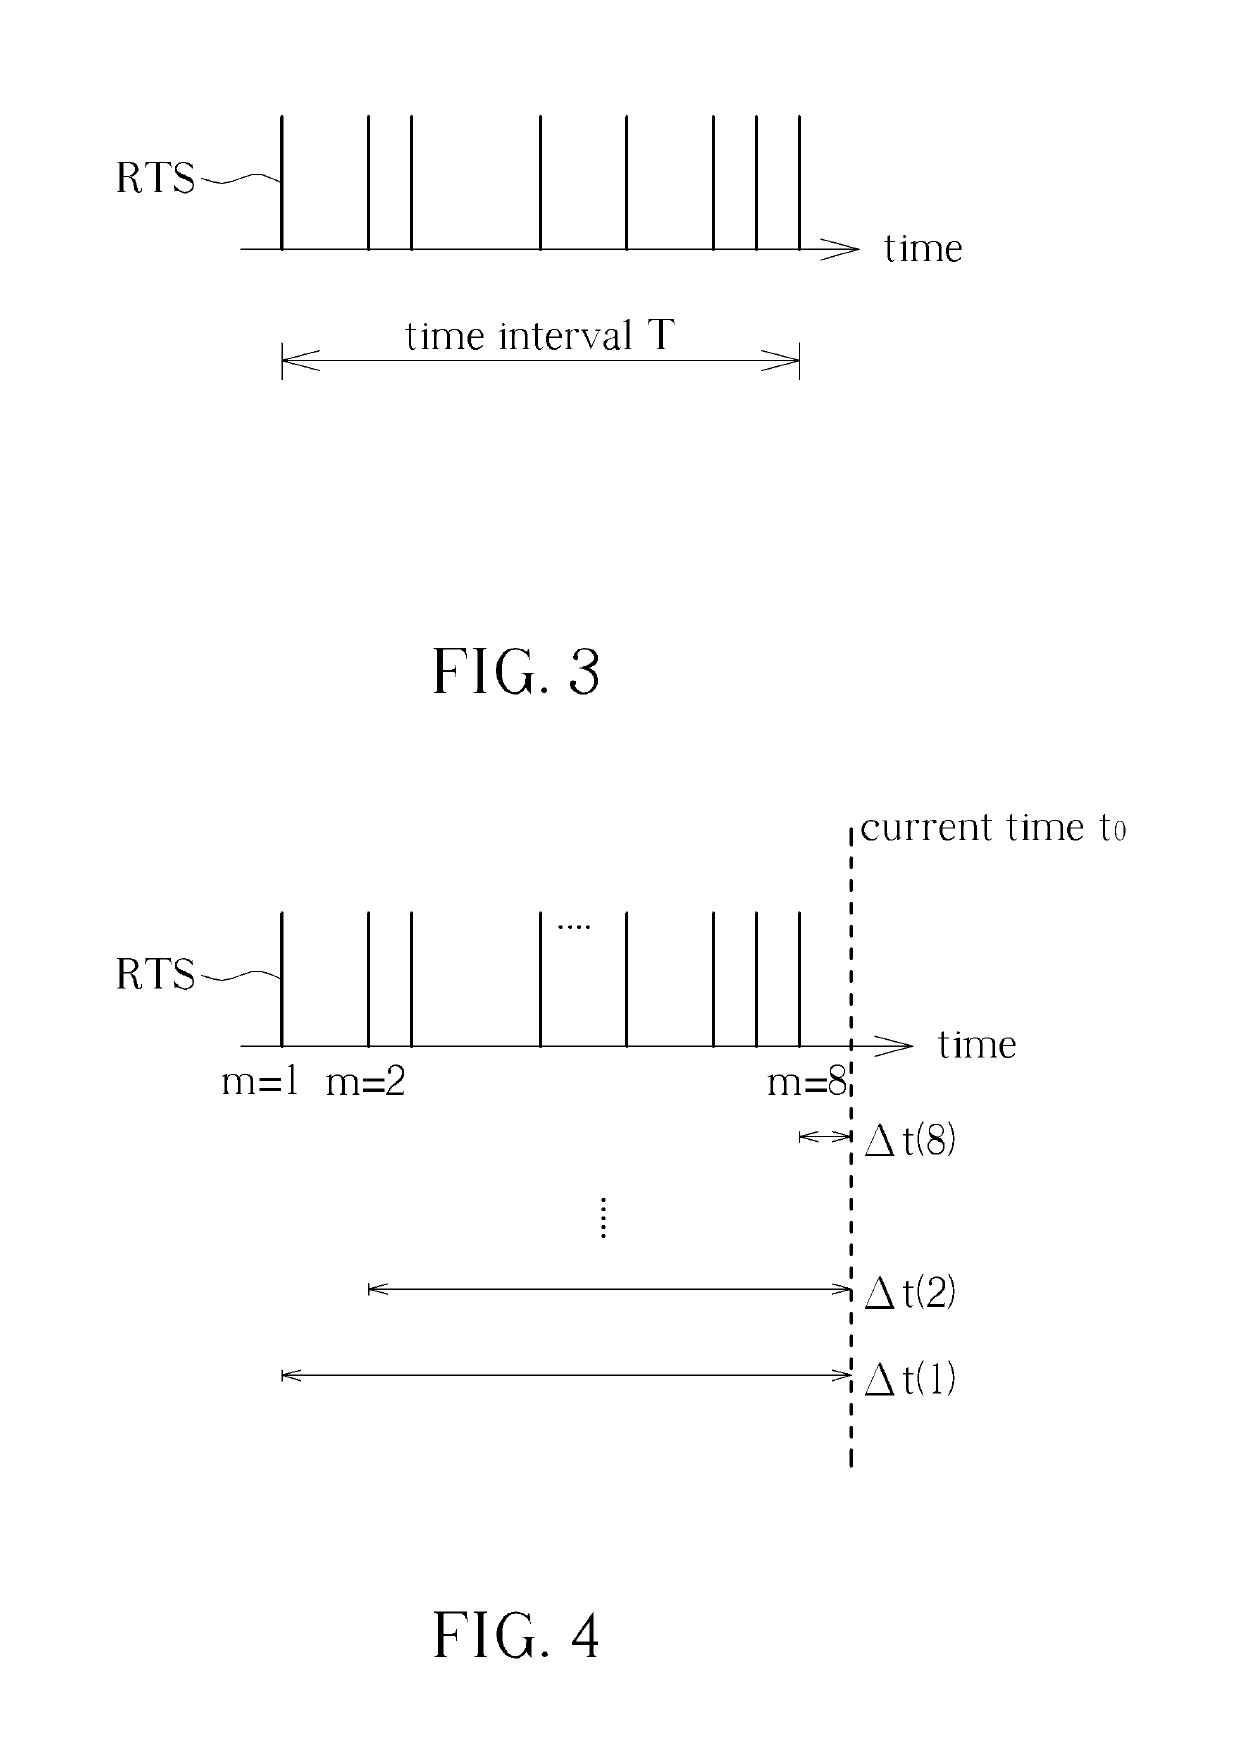 Method for determining stability of a wireless signal and system thereof